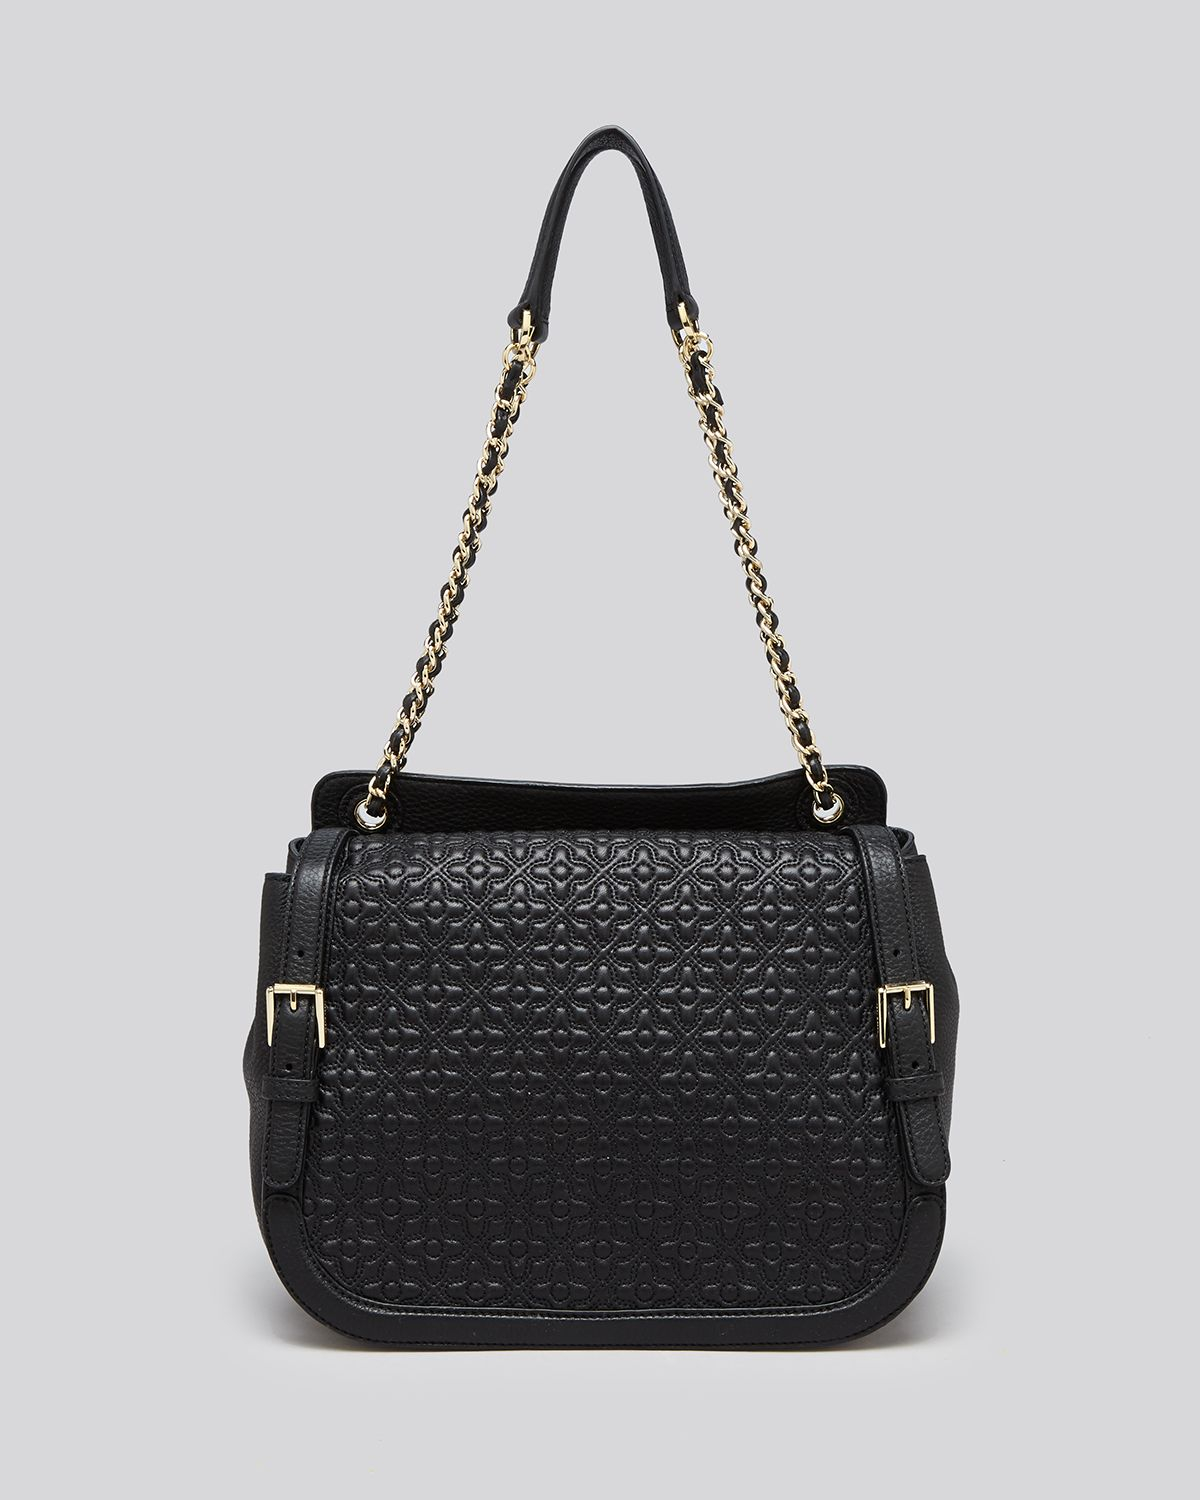 Lyst - Tory Burch Shoulder Bag - Bloom Quilted in Black